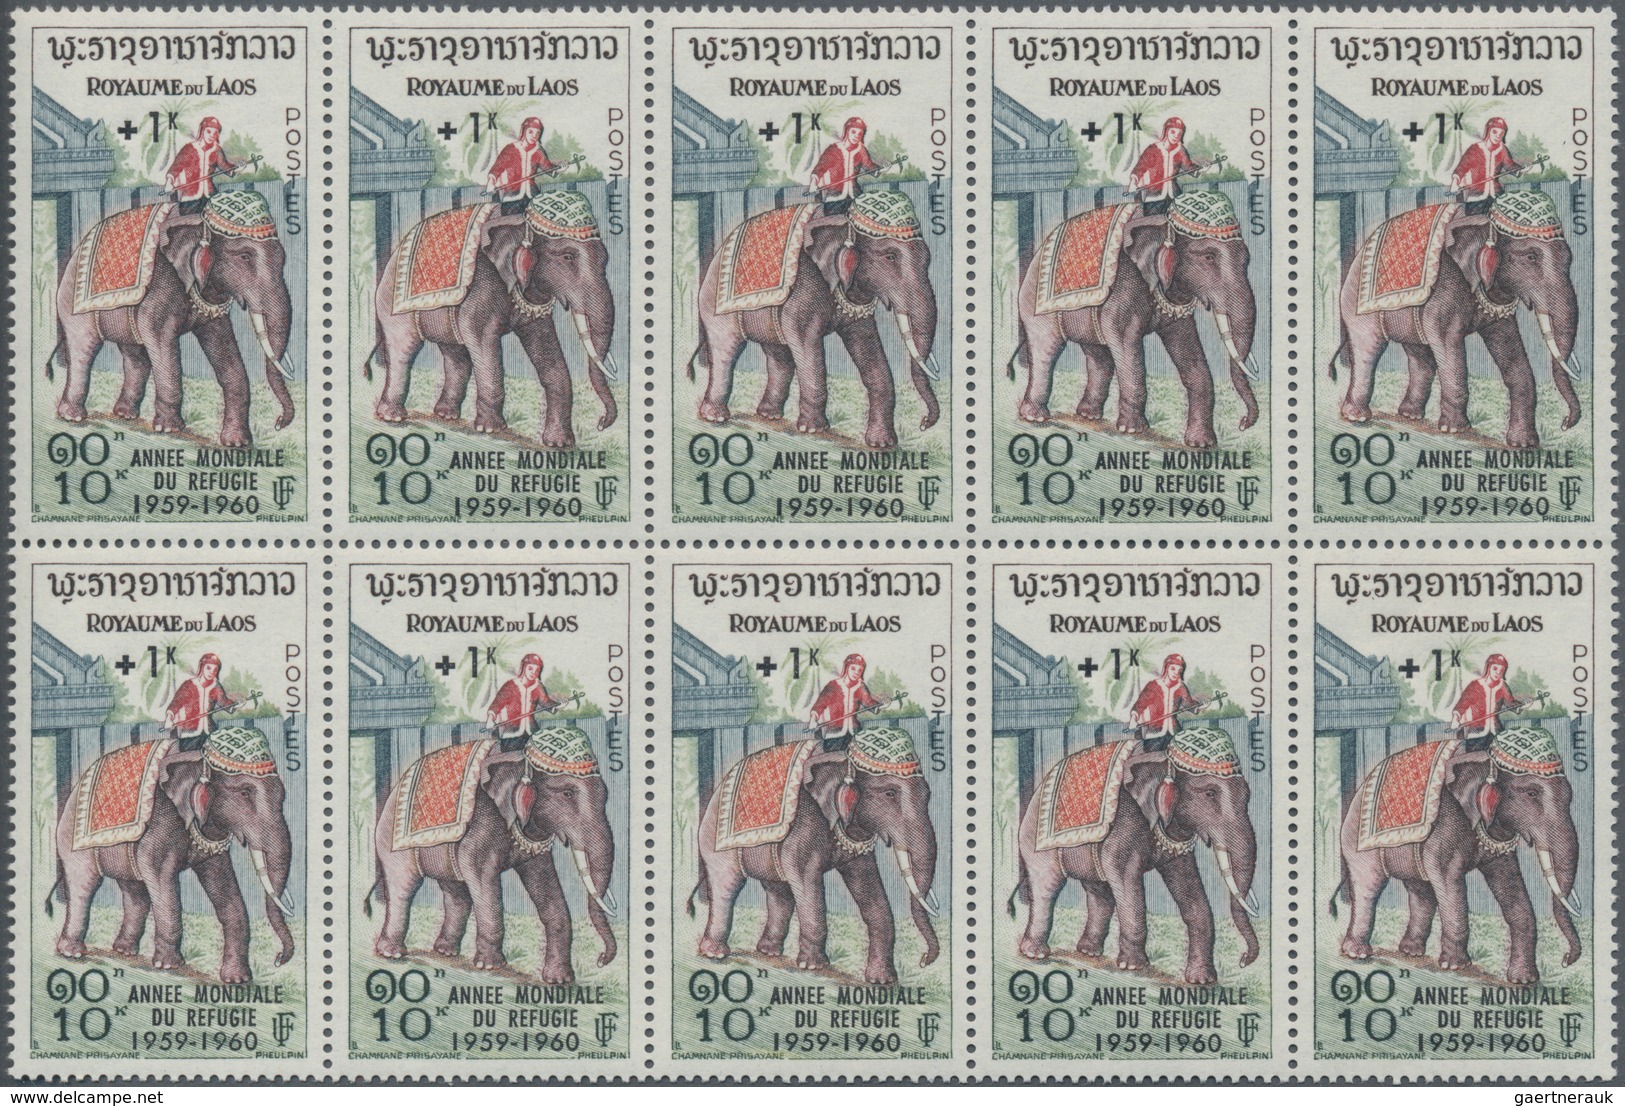 Laos: 1960, World Refugees Year Set Of Two Surcharged Stamps Incl. 4+1k. King Sisavang Vong And 10+1 - Laos